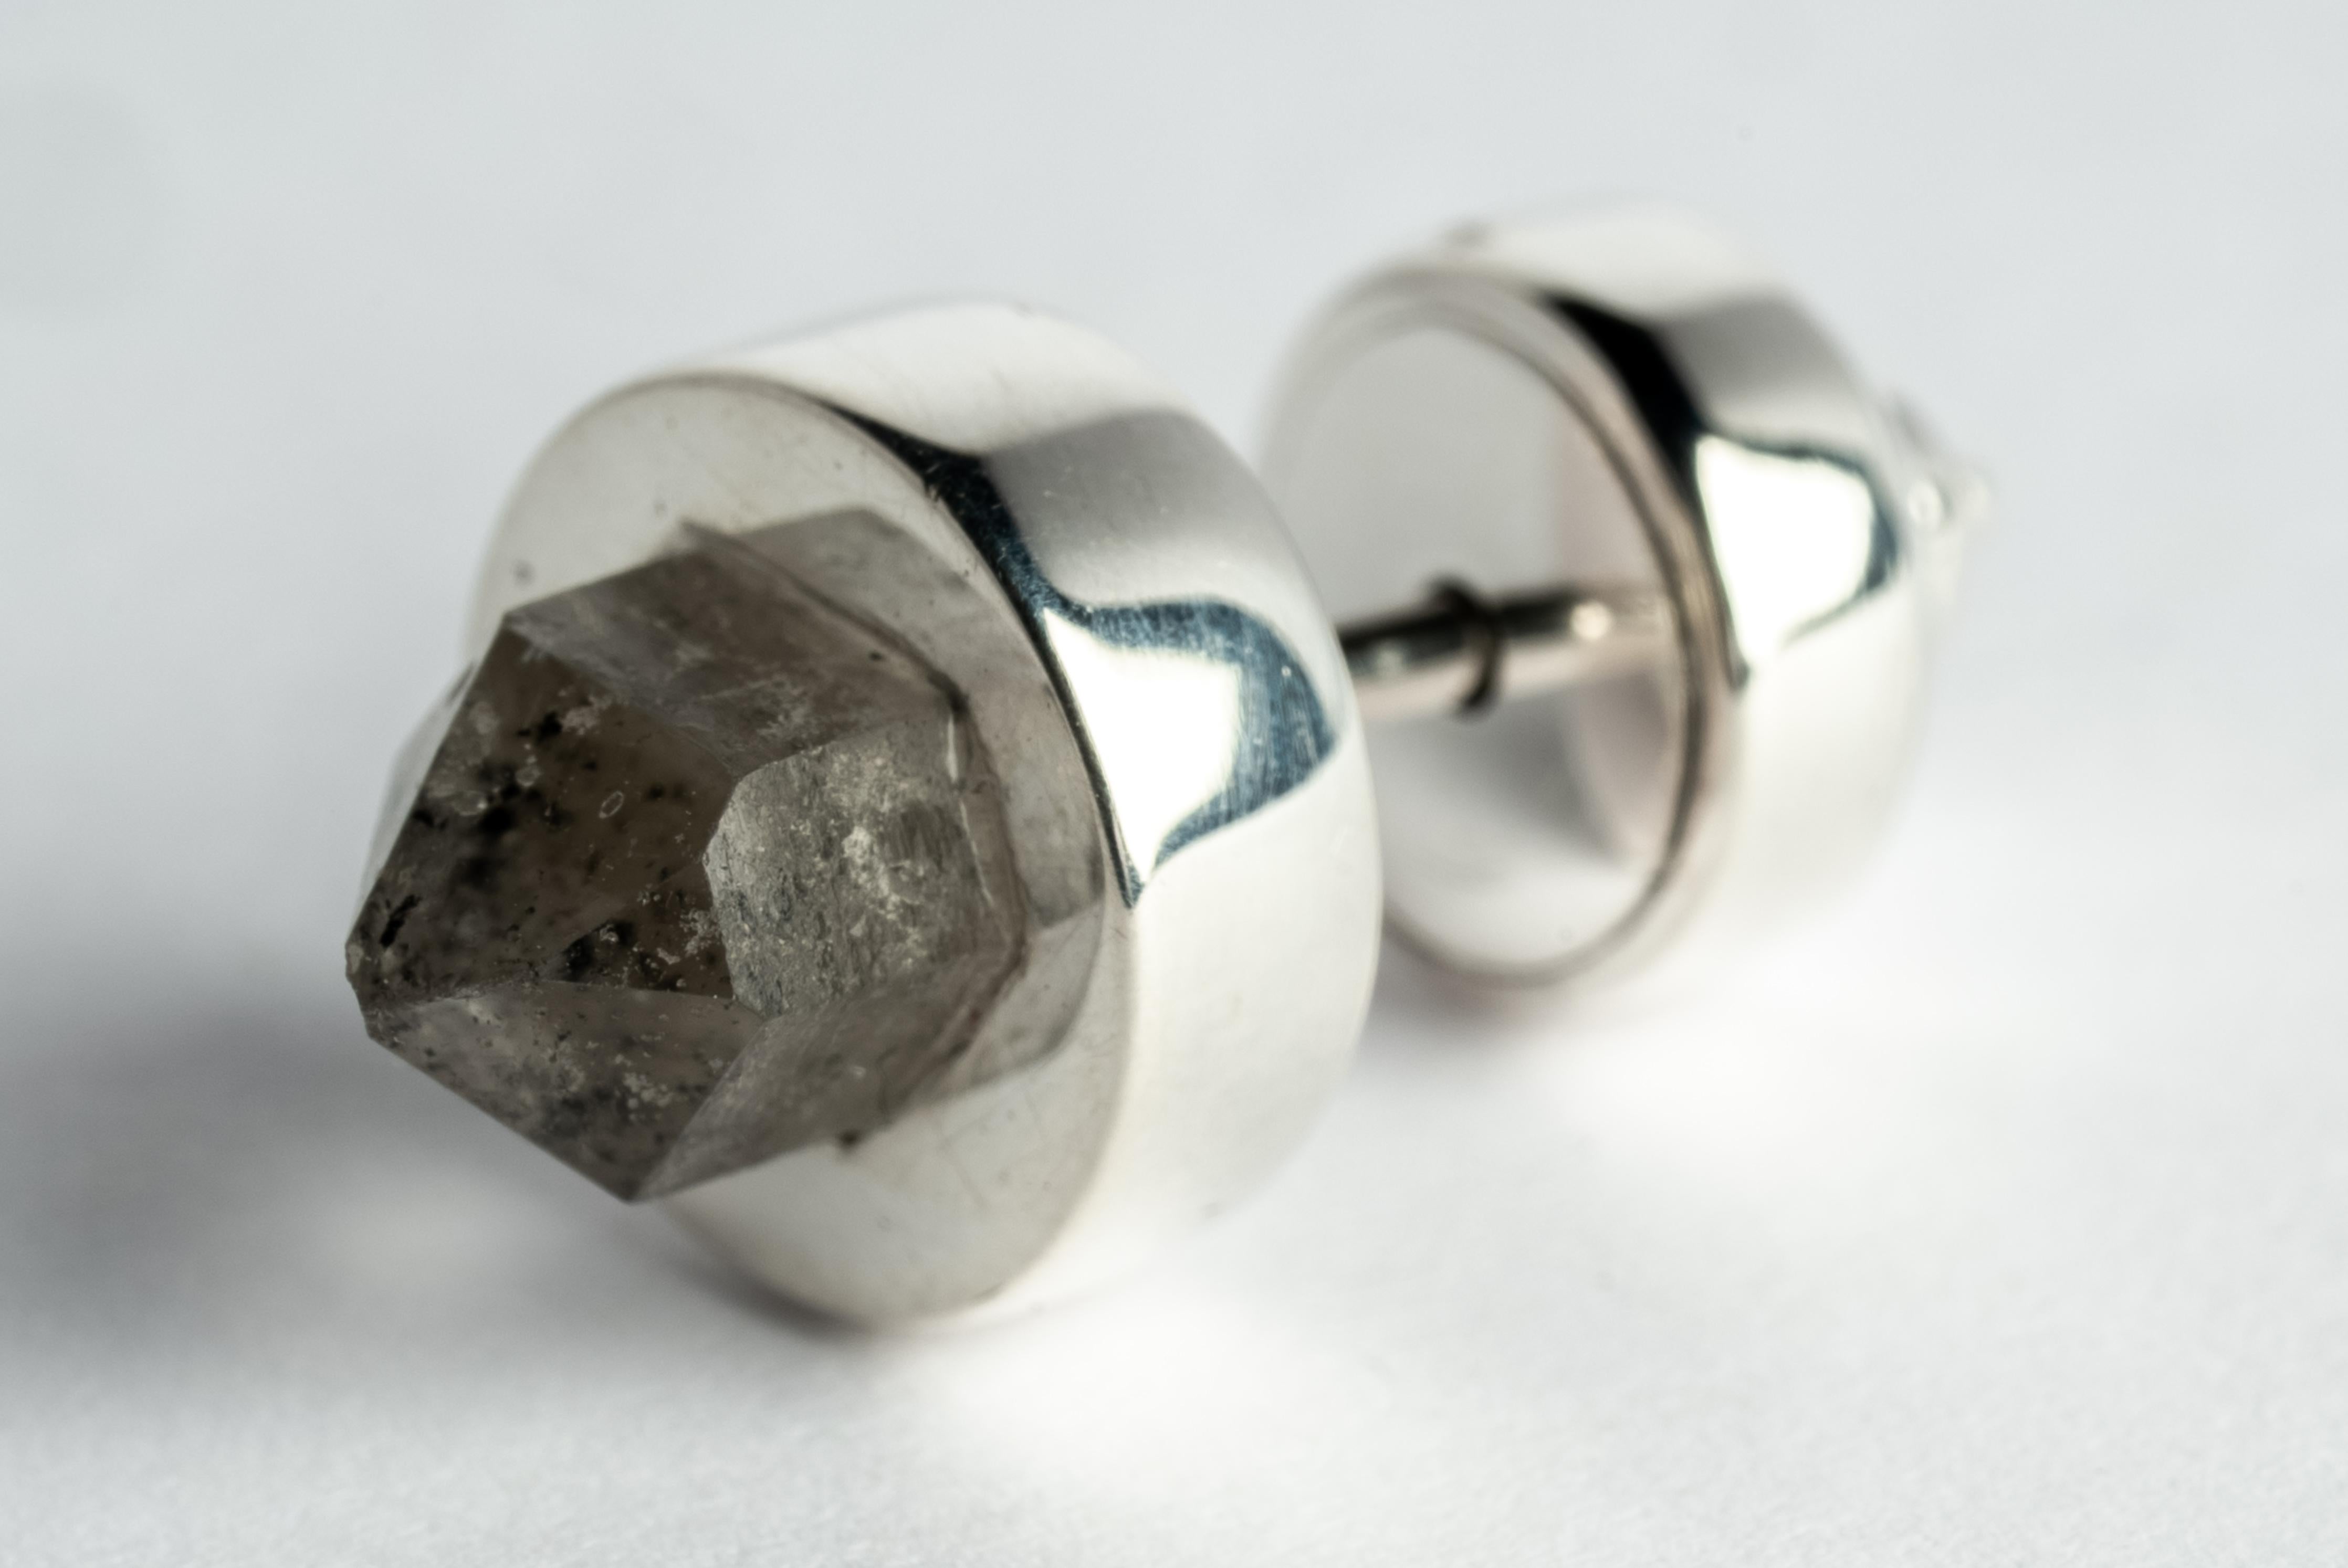 Stud earring in polished sterling silver and double-terminated quartz crystals. This item is made with a naturally occurring element and will vary from the photograph you see. Each piece is unique and this is what makes it special.
Sold as single